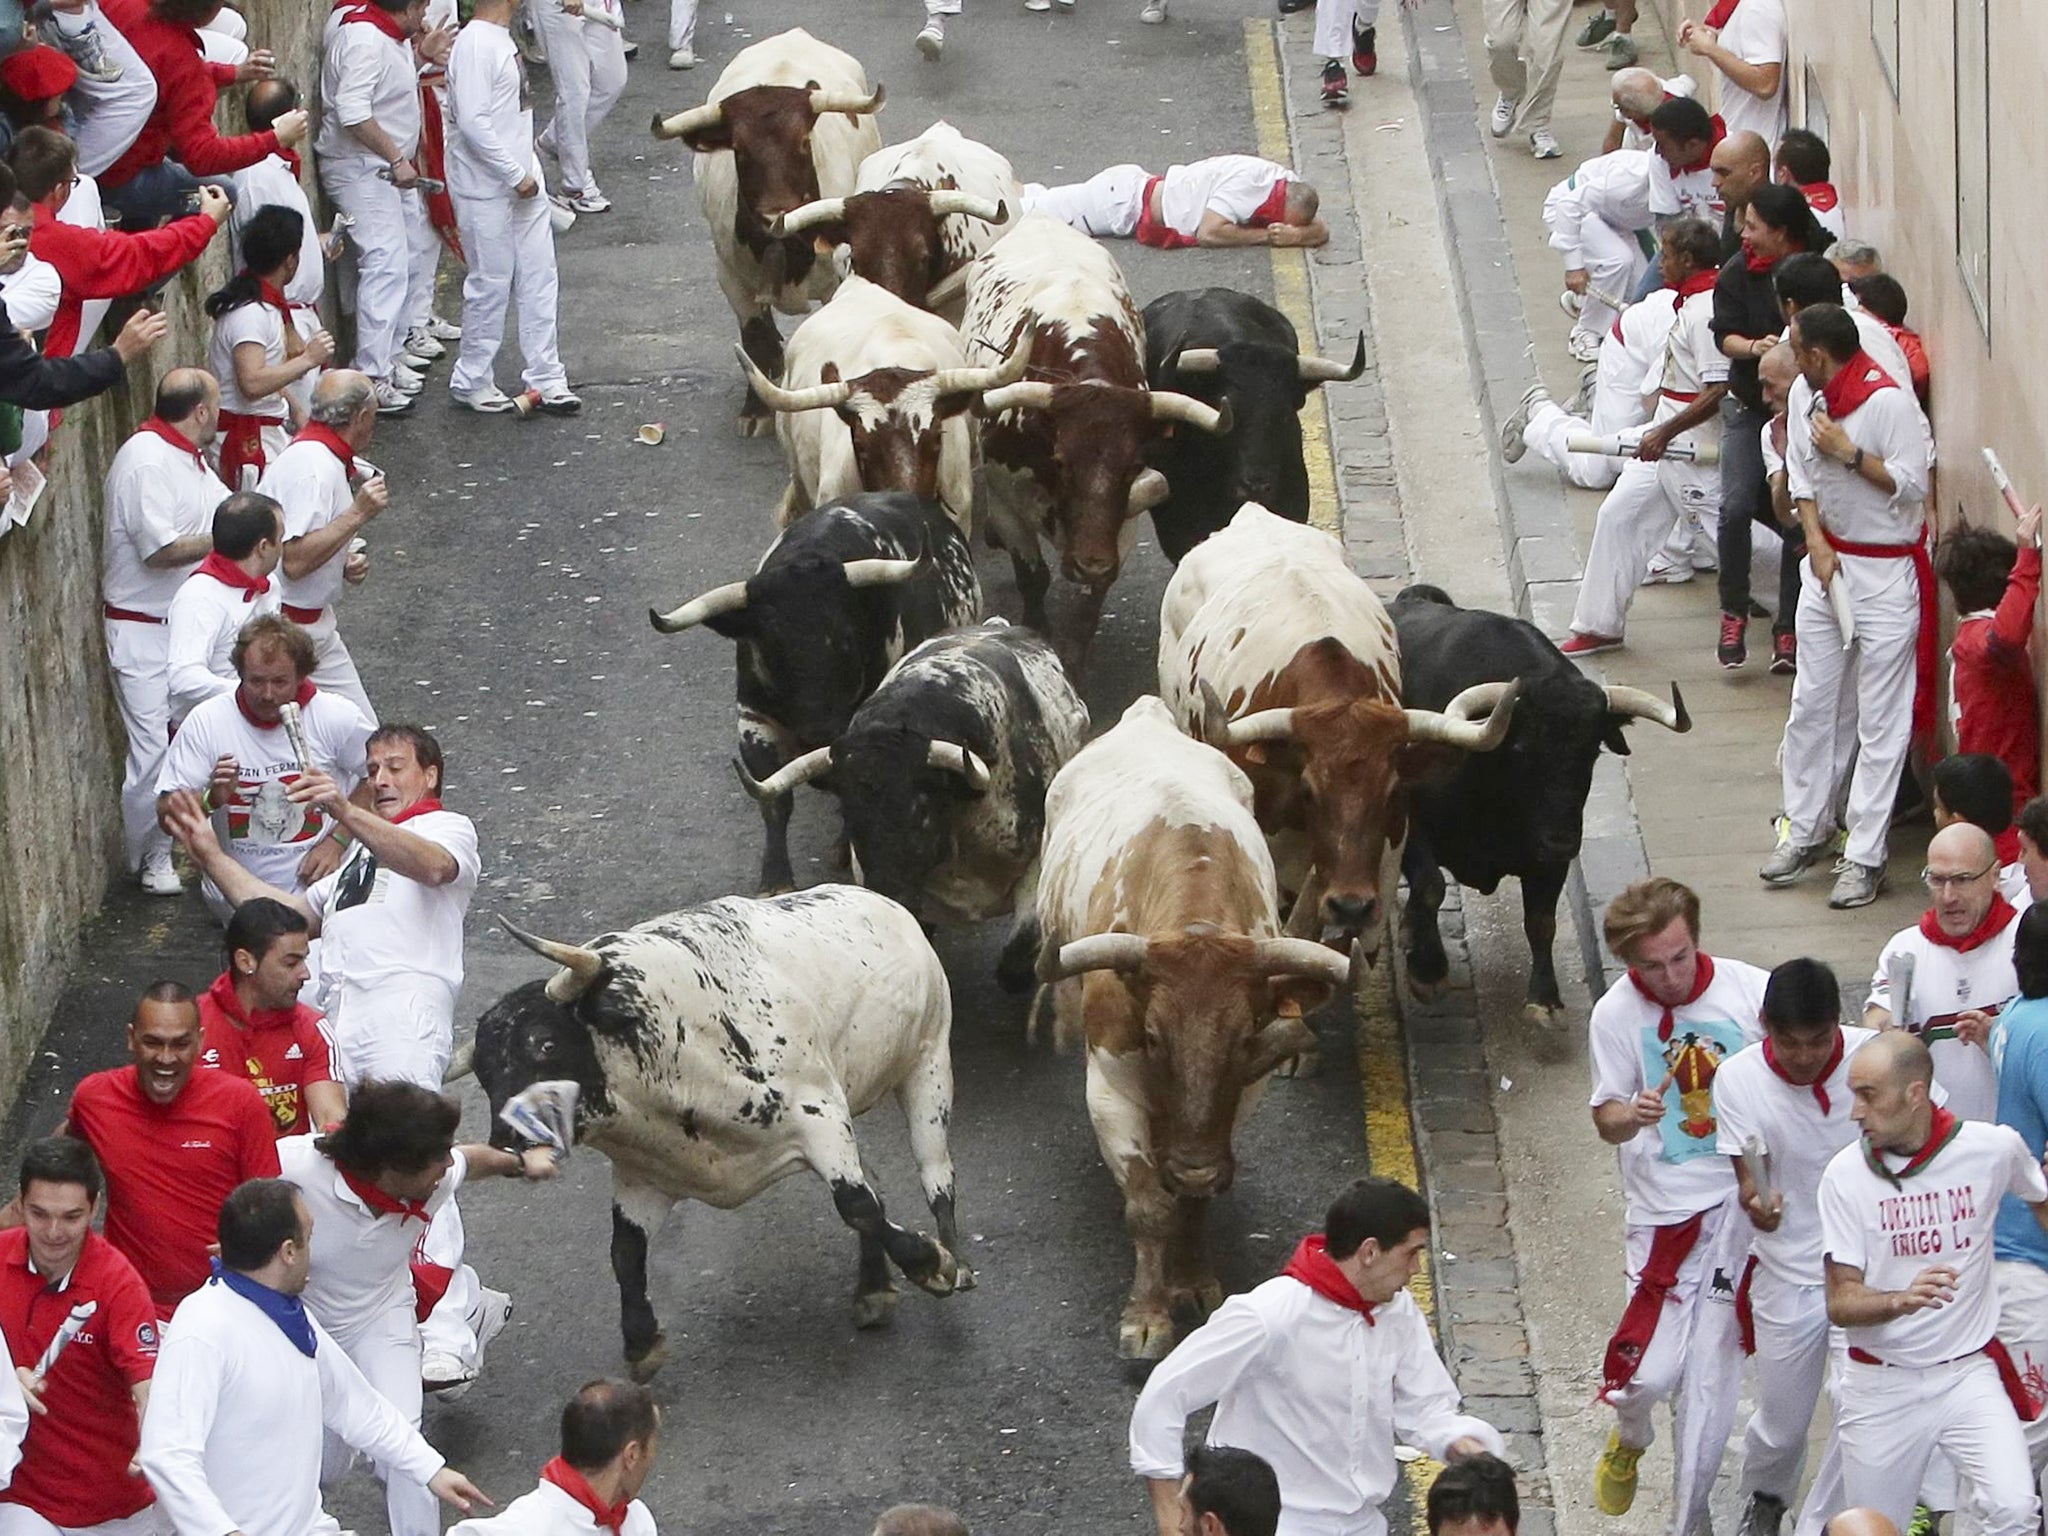 Bulls run after the 'mozos' or runners during the first bullrun of the 2014 Sanfermines in Pamplona